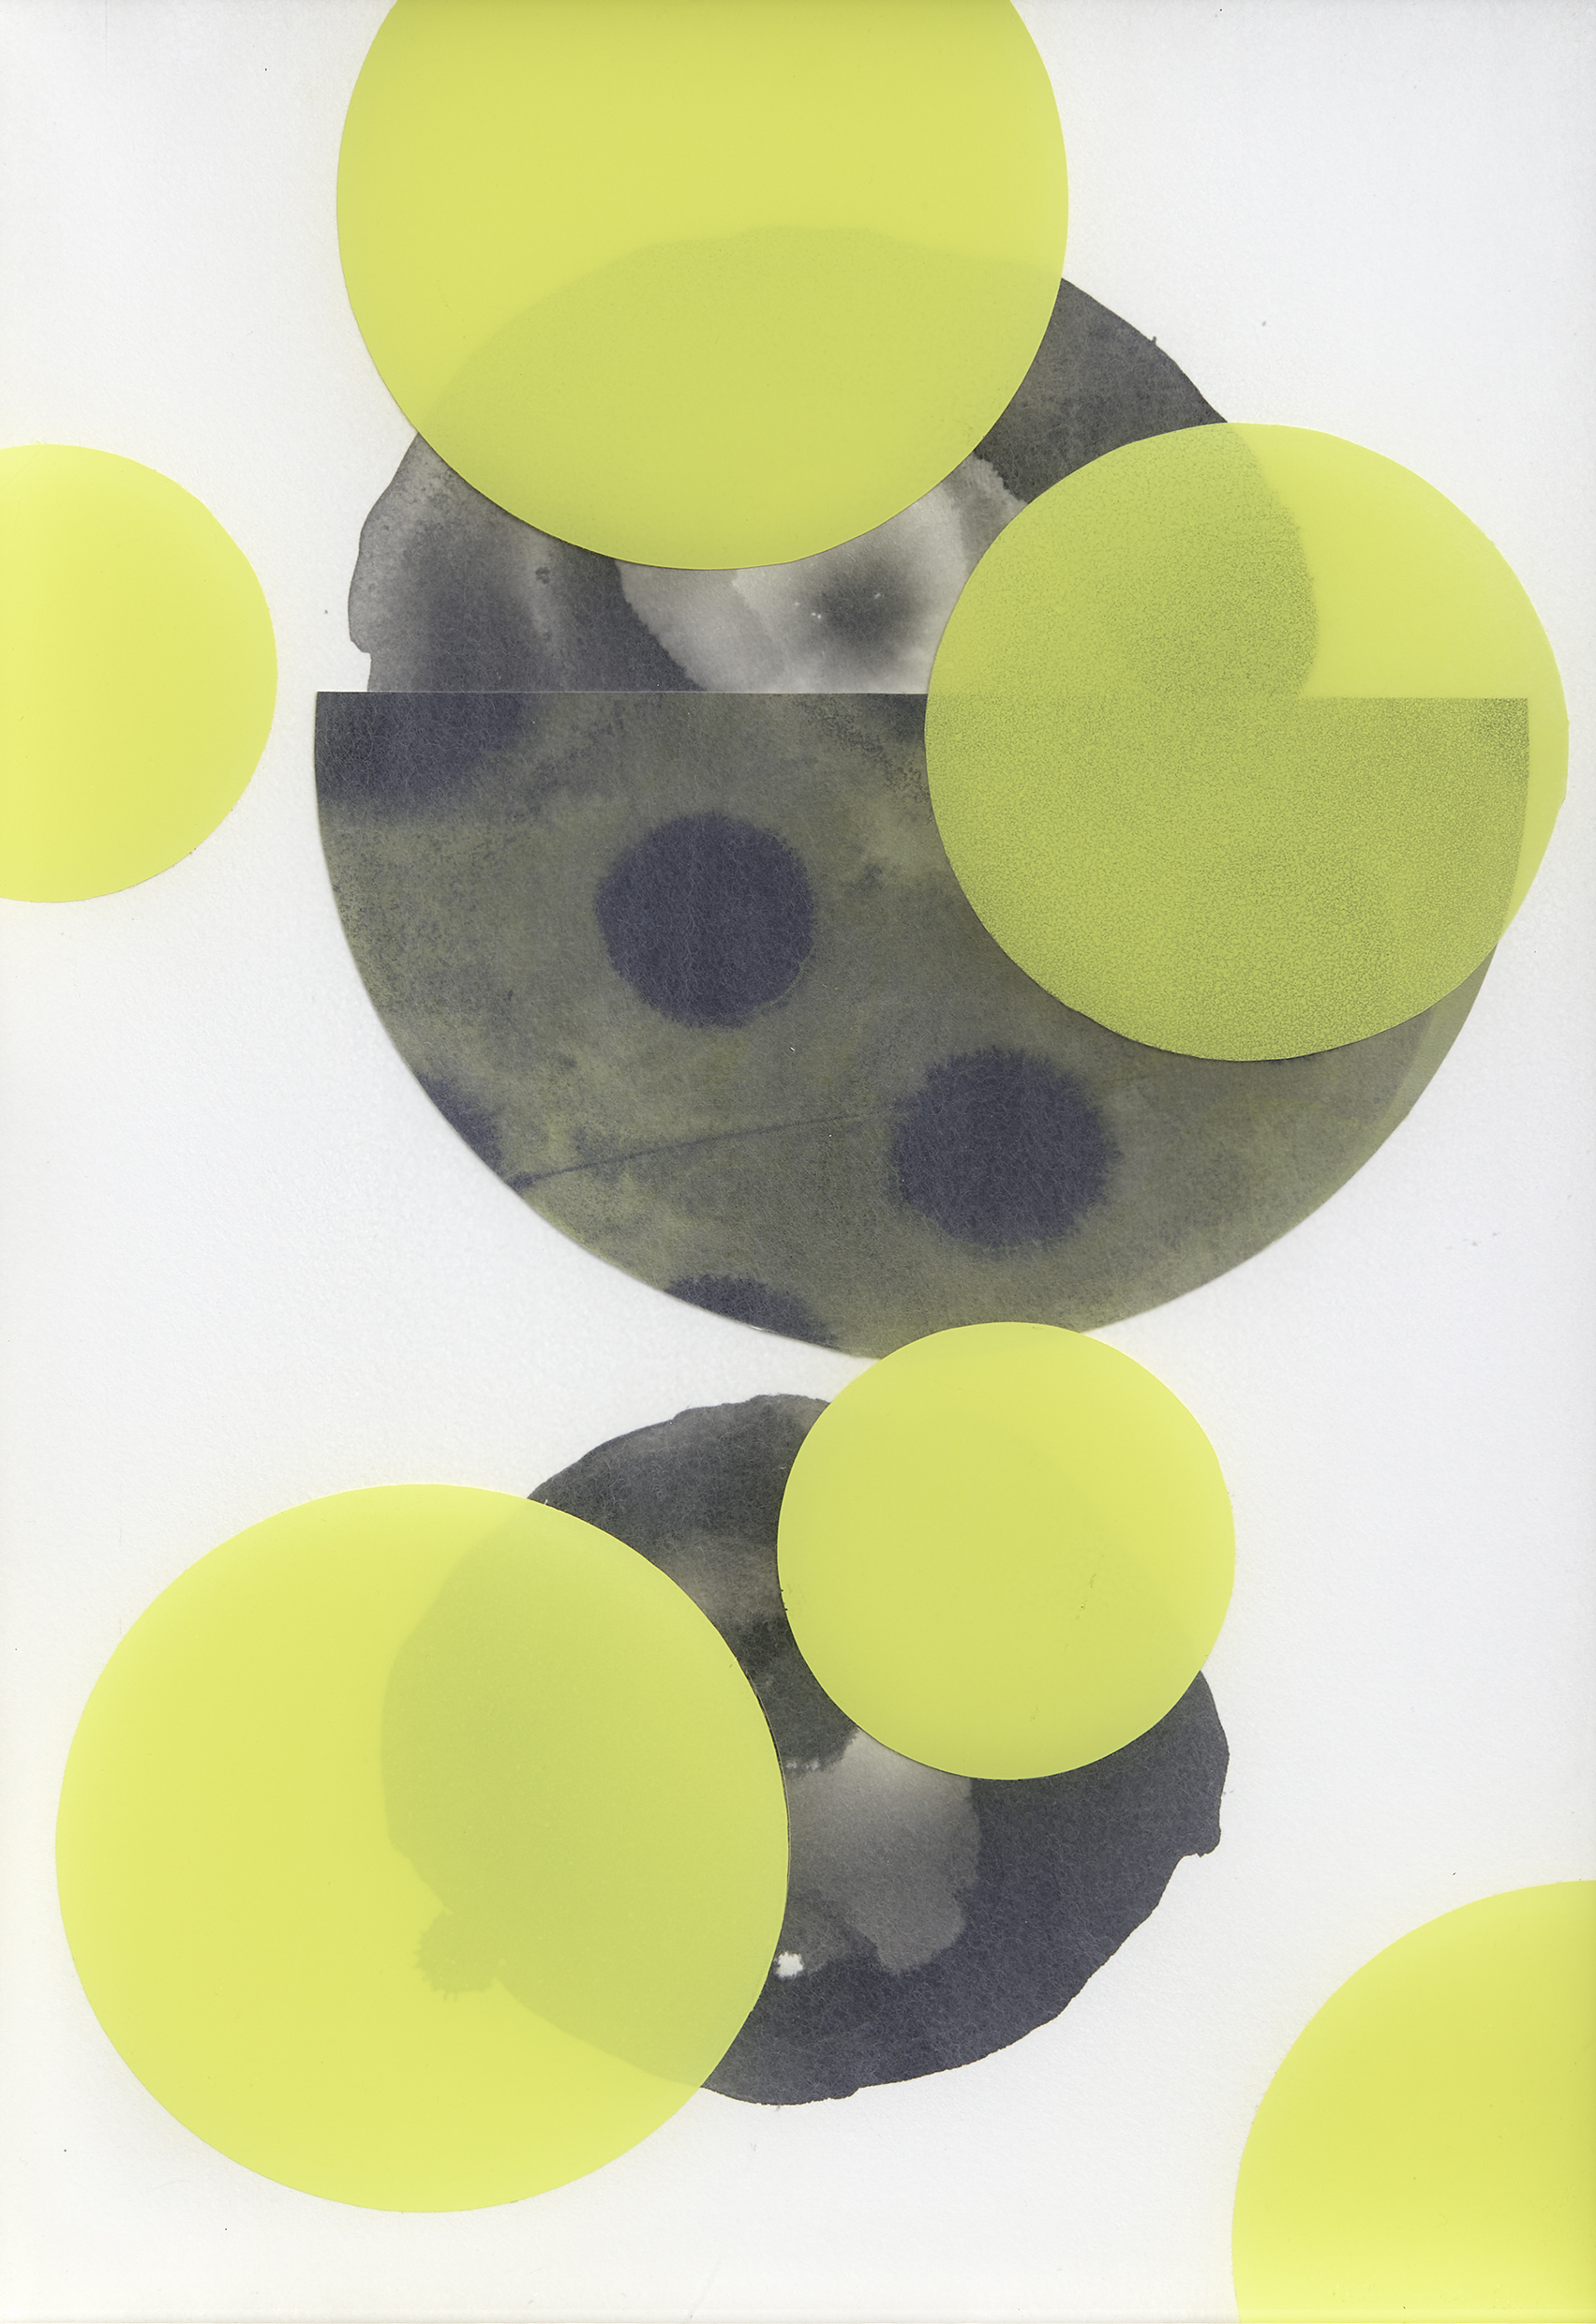 Mark Hislop 'Yellow Vision 2' synthetic polymer paint on mylar, charcoal on paper 48 x 34cm $2,000